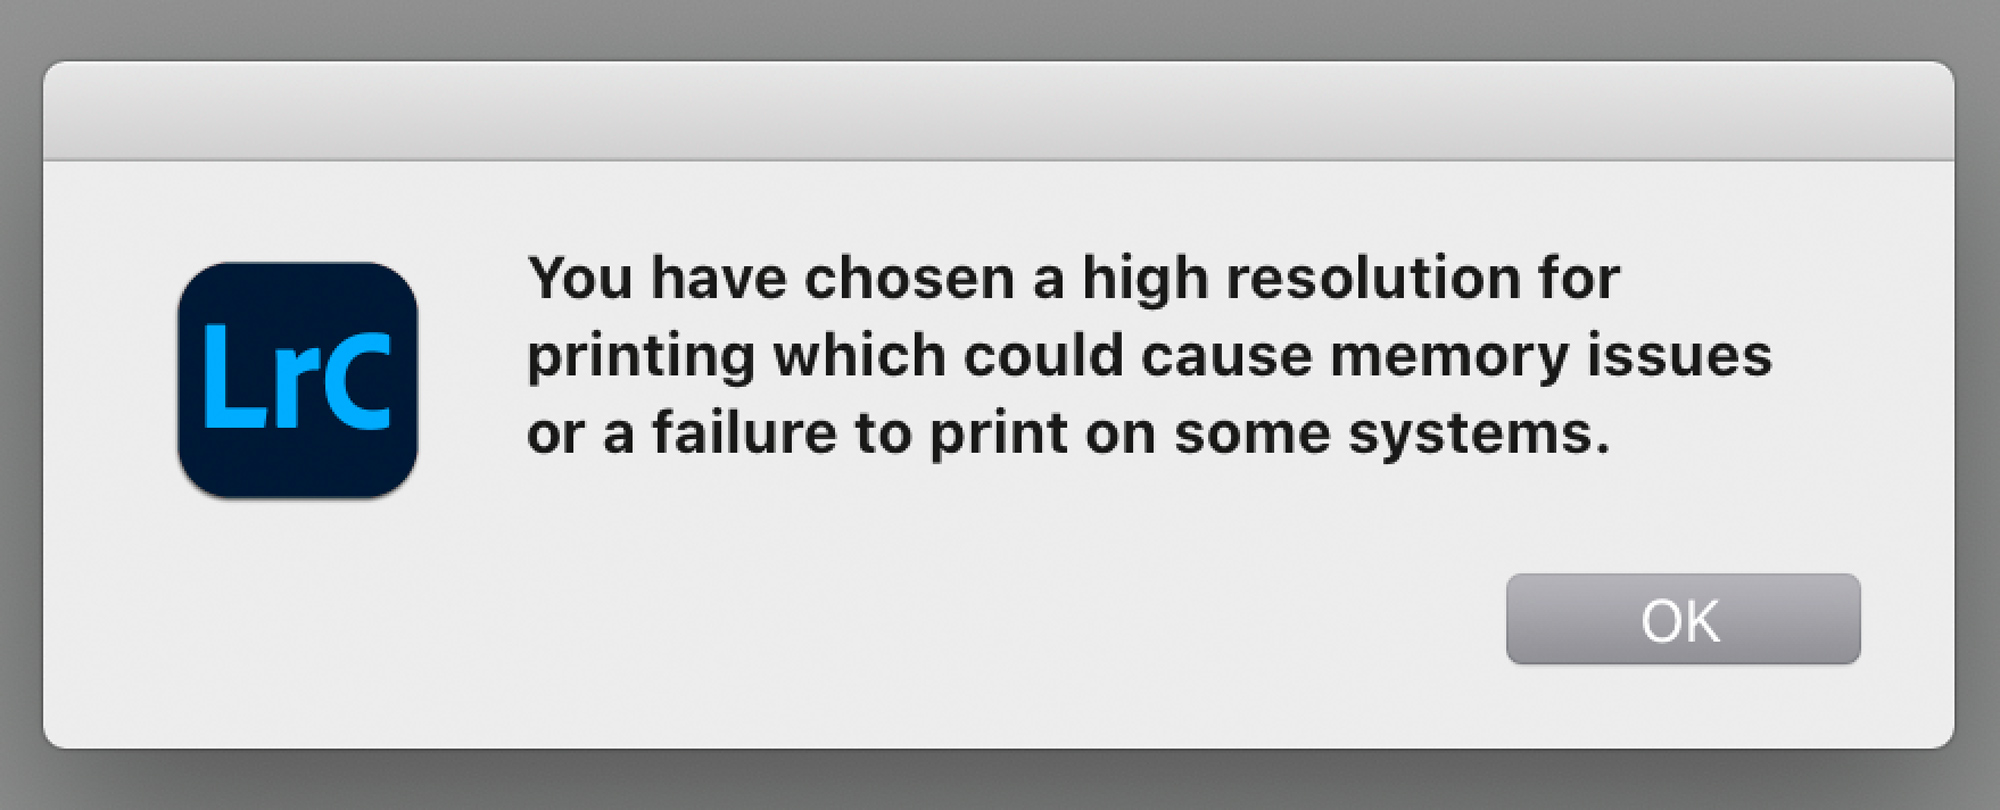 This is Adobe’s way of saying if you send too much resolution to your printer, it’s your own darn fault. Don’t worry, if you accidentally enter in some weird number above 1,440 it won’t let you as shown below.